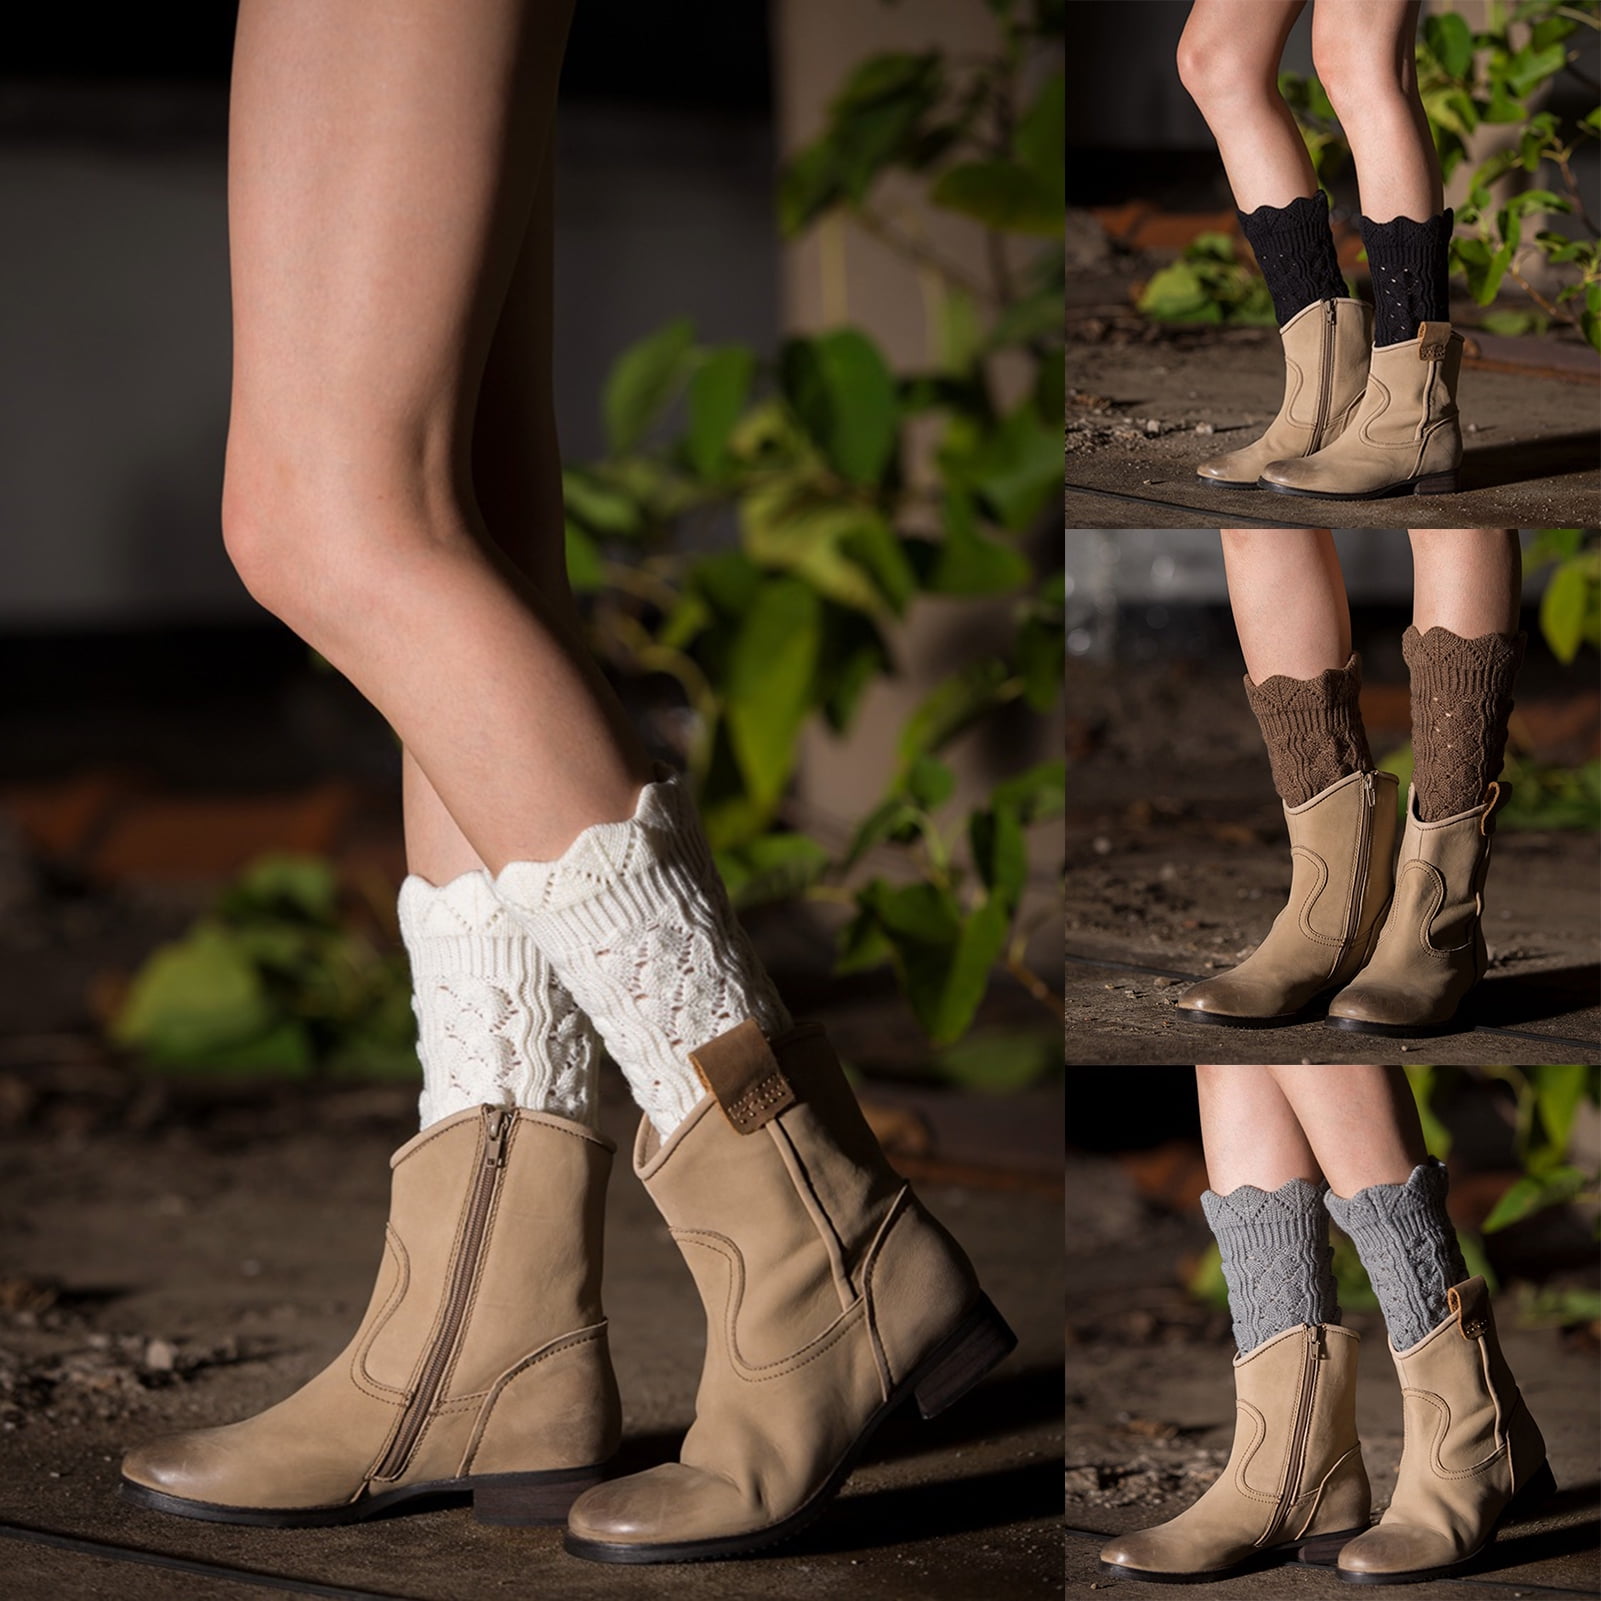 Details about   Women Ladies Winter Crochet Knitted Leg Warmers Cuffs Toppers Boot Casual Socks